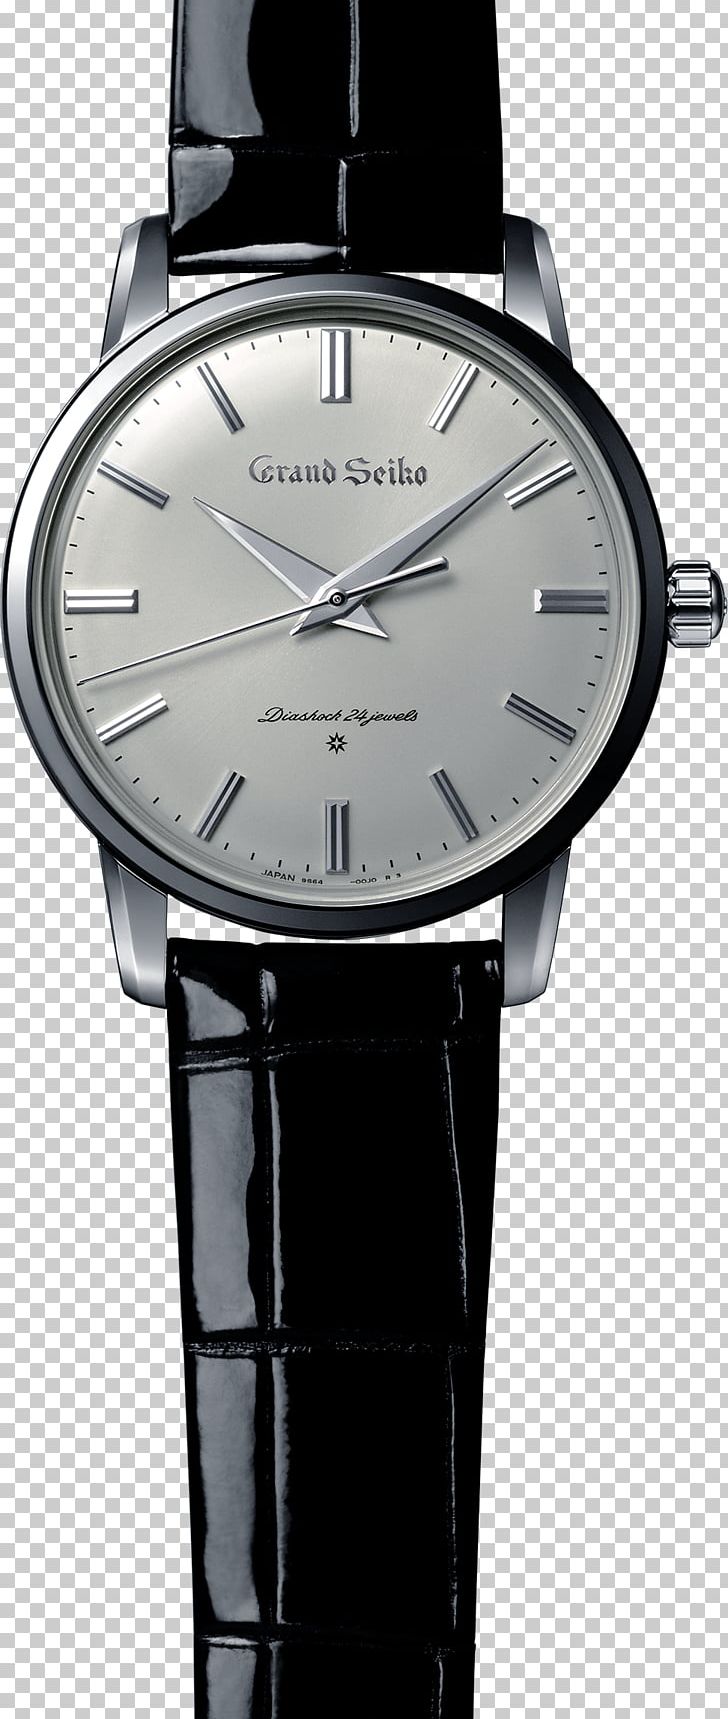 WatchTime Baselworld Grand Seiko PNG, Clipart, Accessories, Baselworld, Brand, Clock, Creation Free PNG Download